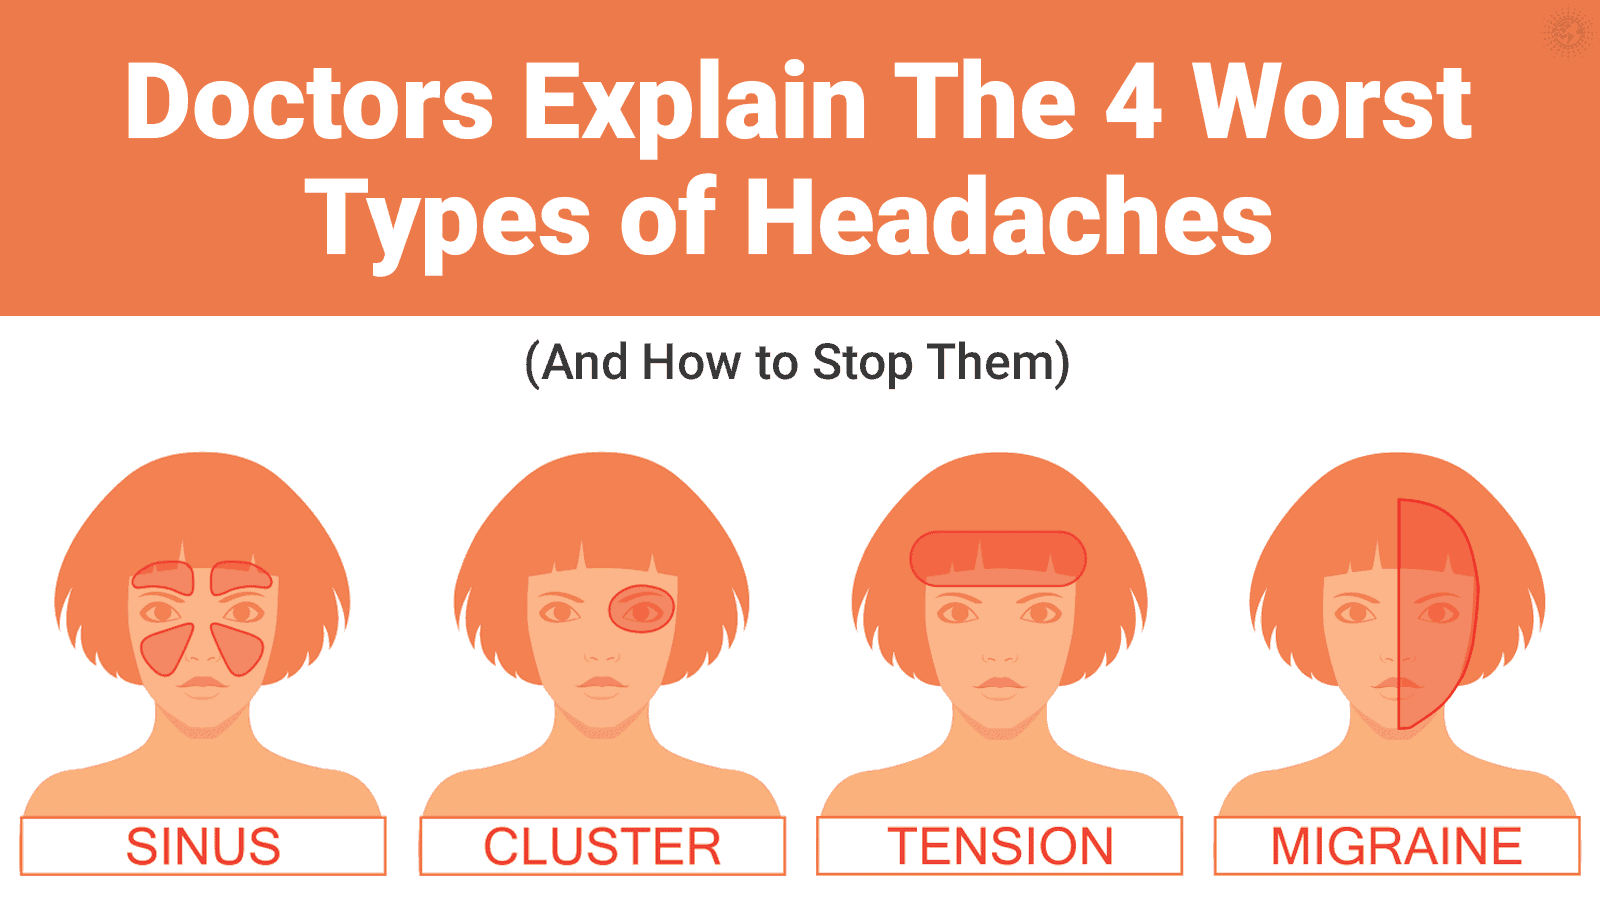 Doctors Explain The 4 Worst Types of Headaches (And How to Stop Them)